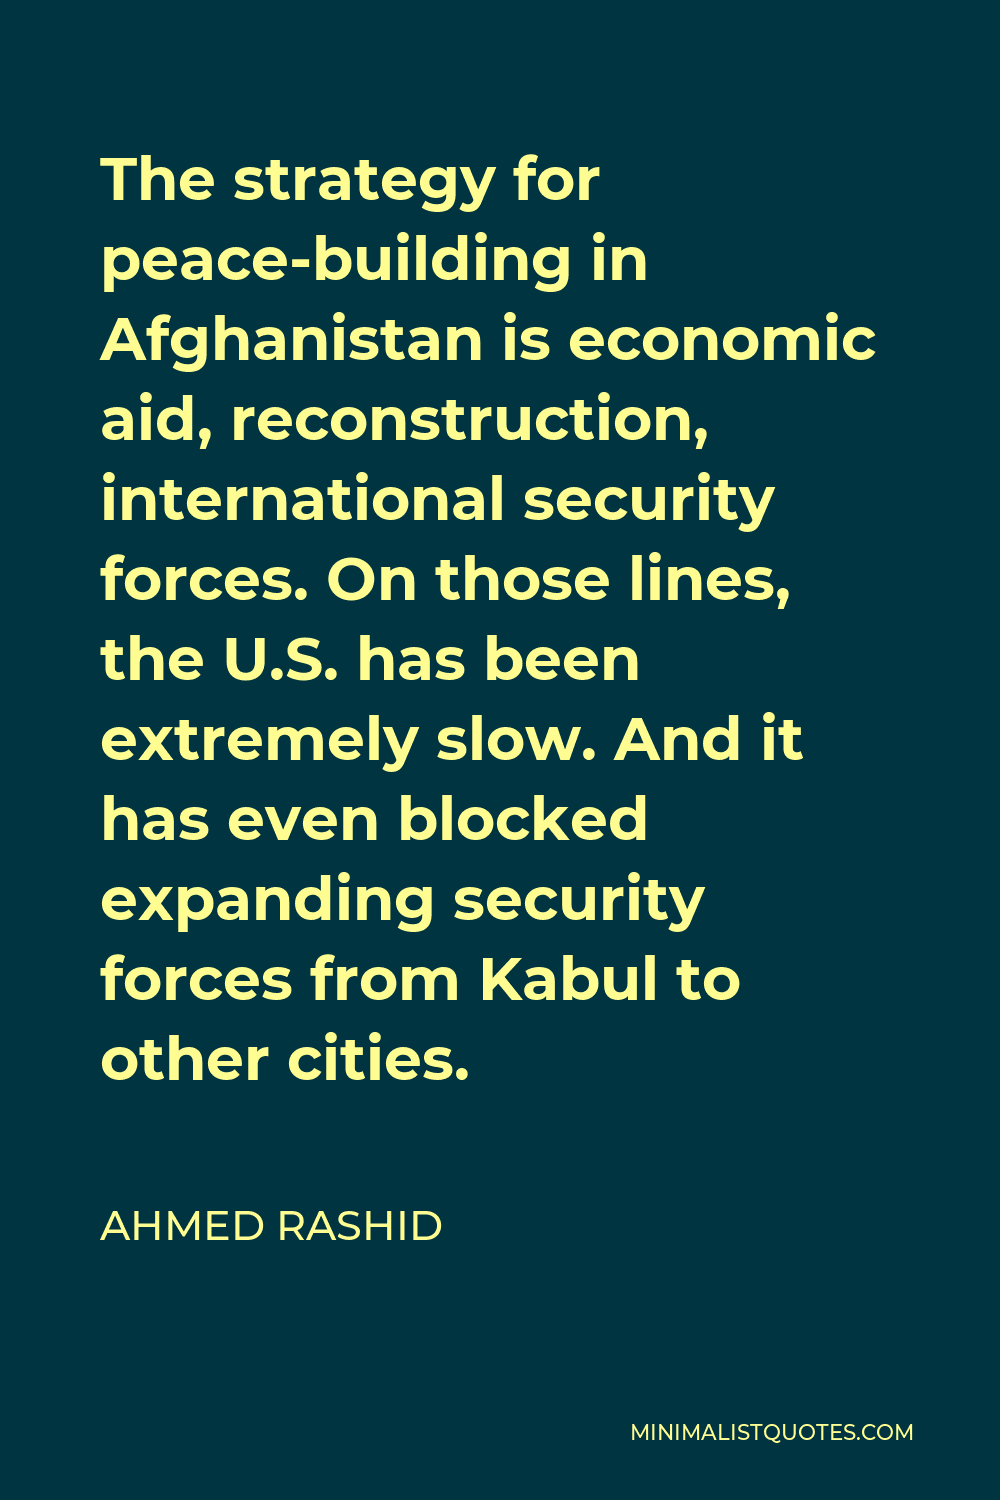 Ahmed Rashid Quote - The strategy for peace-building in Afghanistan is economic aid, reconstruction, international security forces. On those lines, the U.S. has been extremely slow. And it has even blocked expanding security forces from Kabul to other cities.